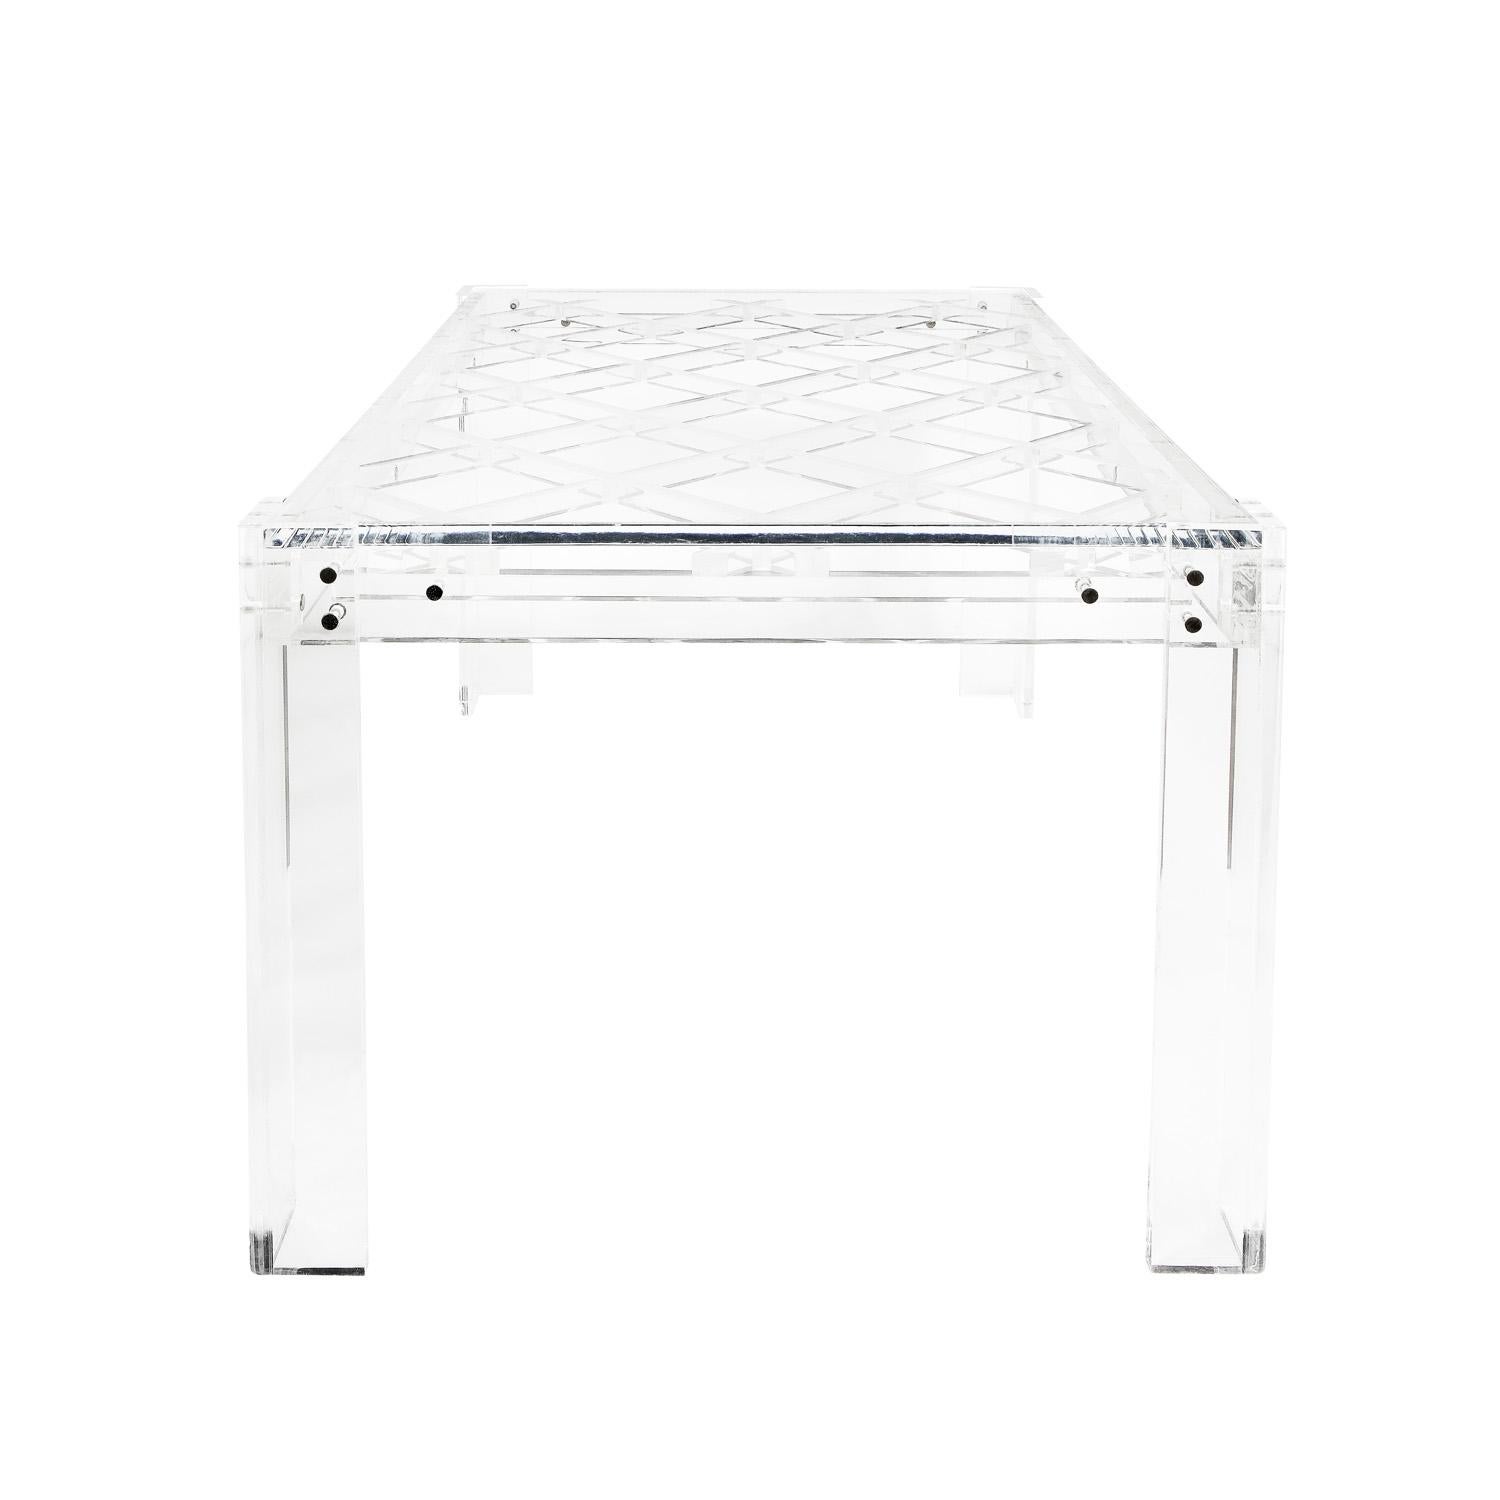 Mid-Century Modern Exceptional Thick Lucite Dining Table with Criss-Cross Design 1970s For Sale